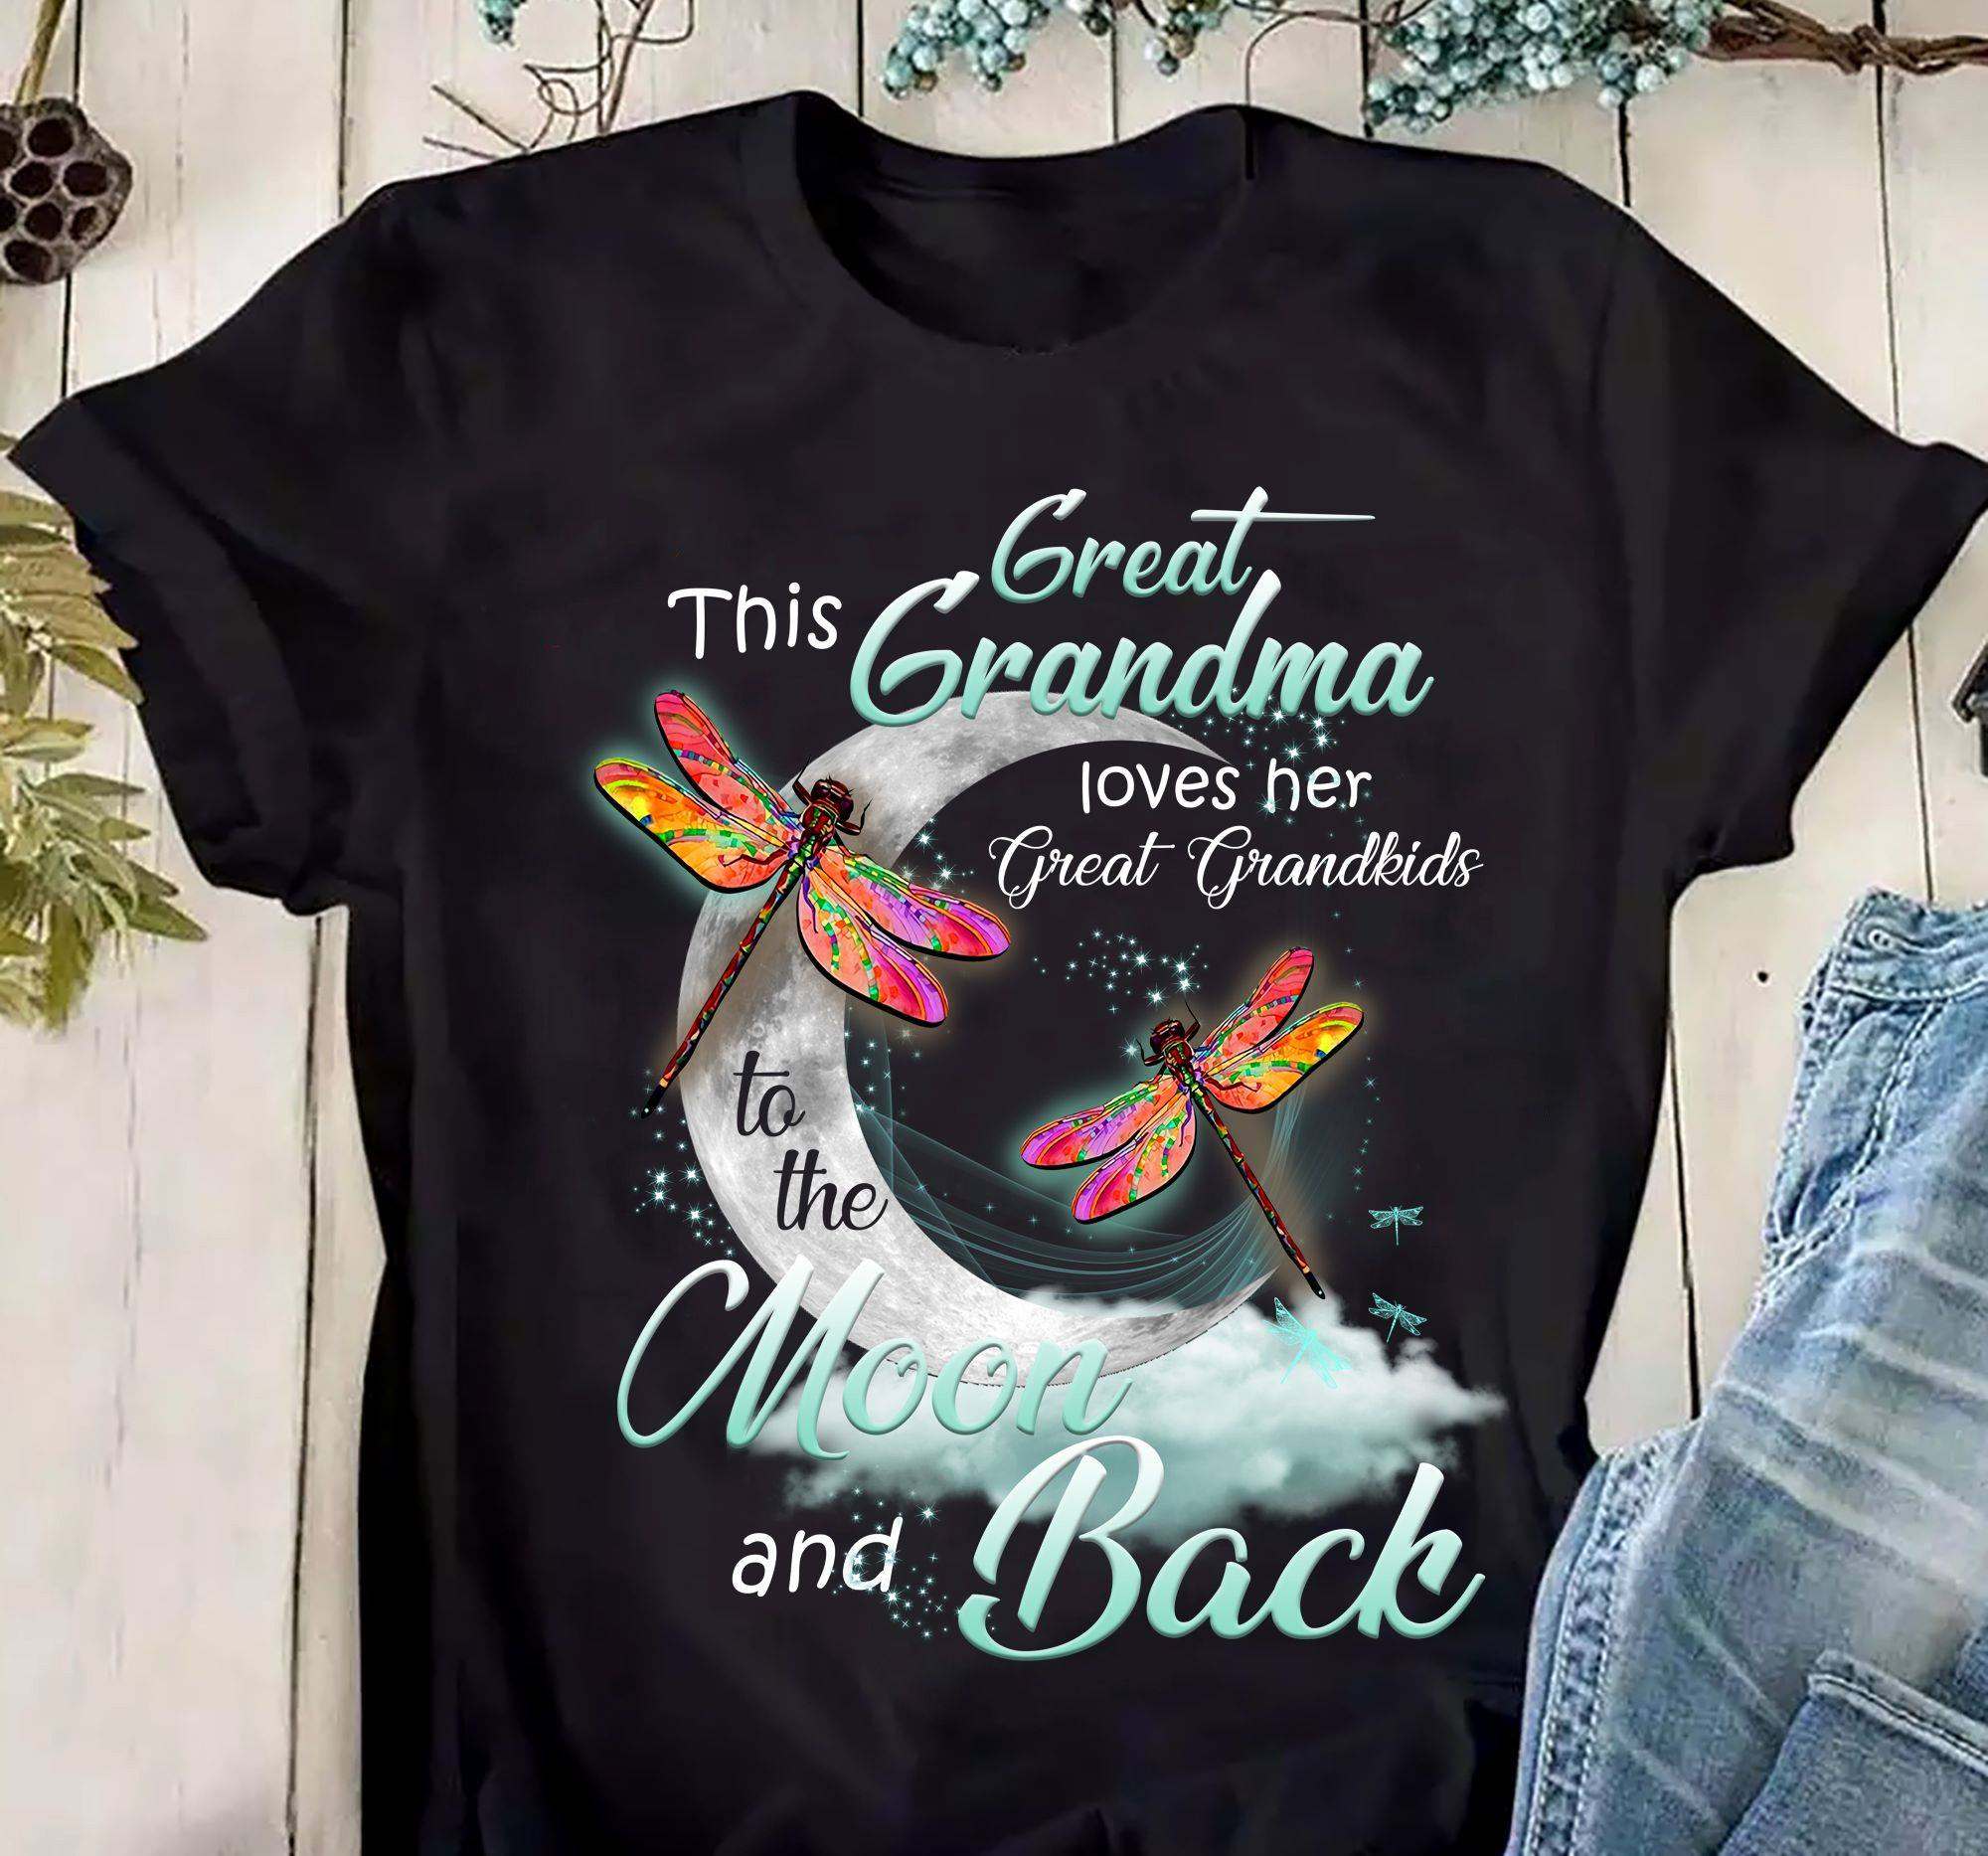 Moon Dragonfly - This great grandma loves her great grandkids to the moon and back